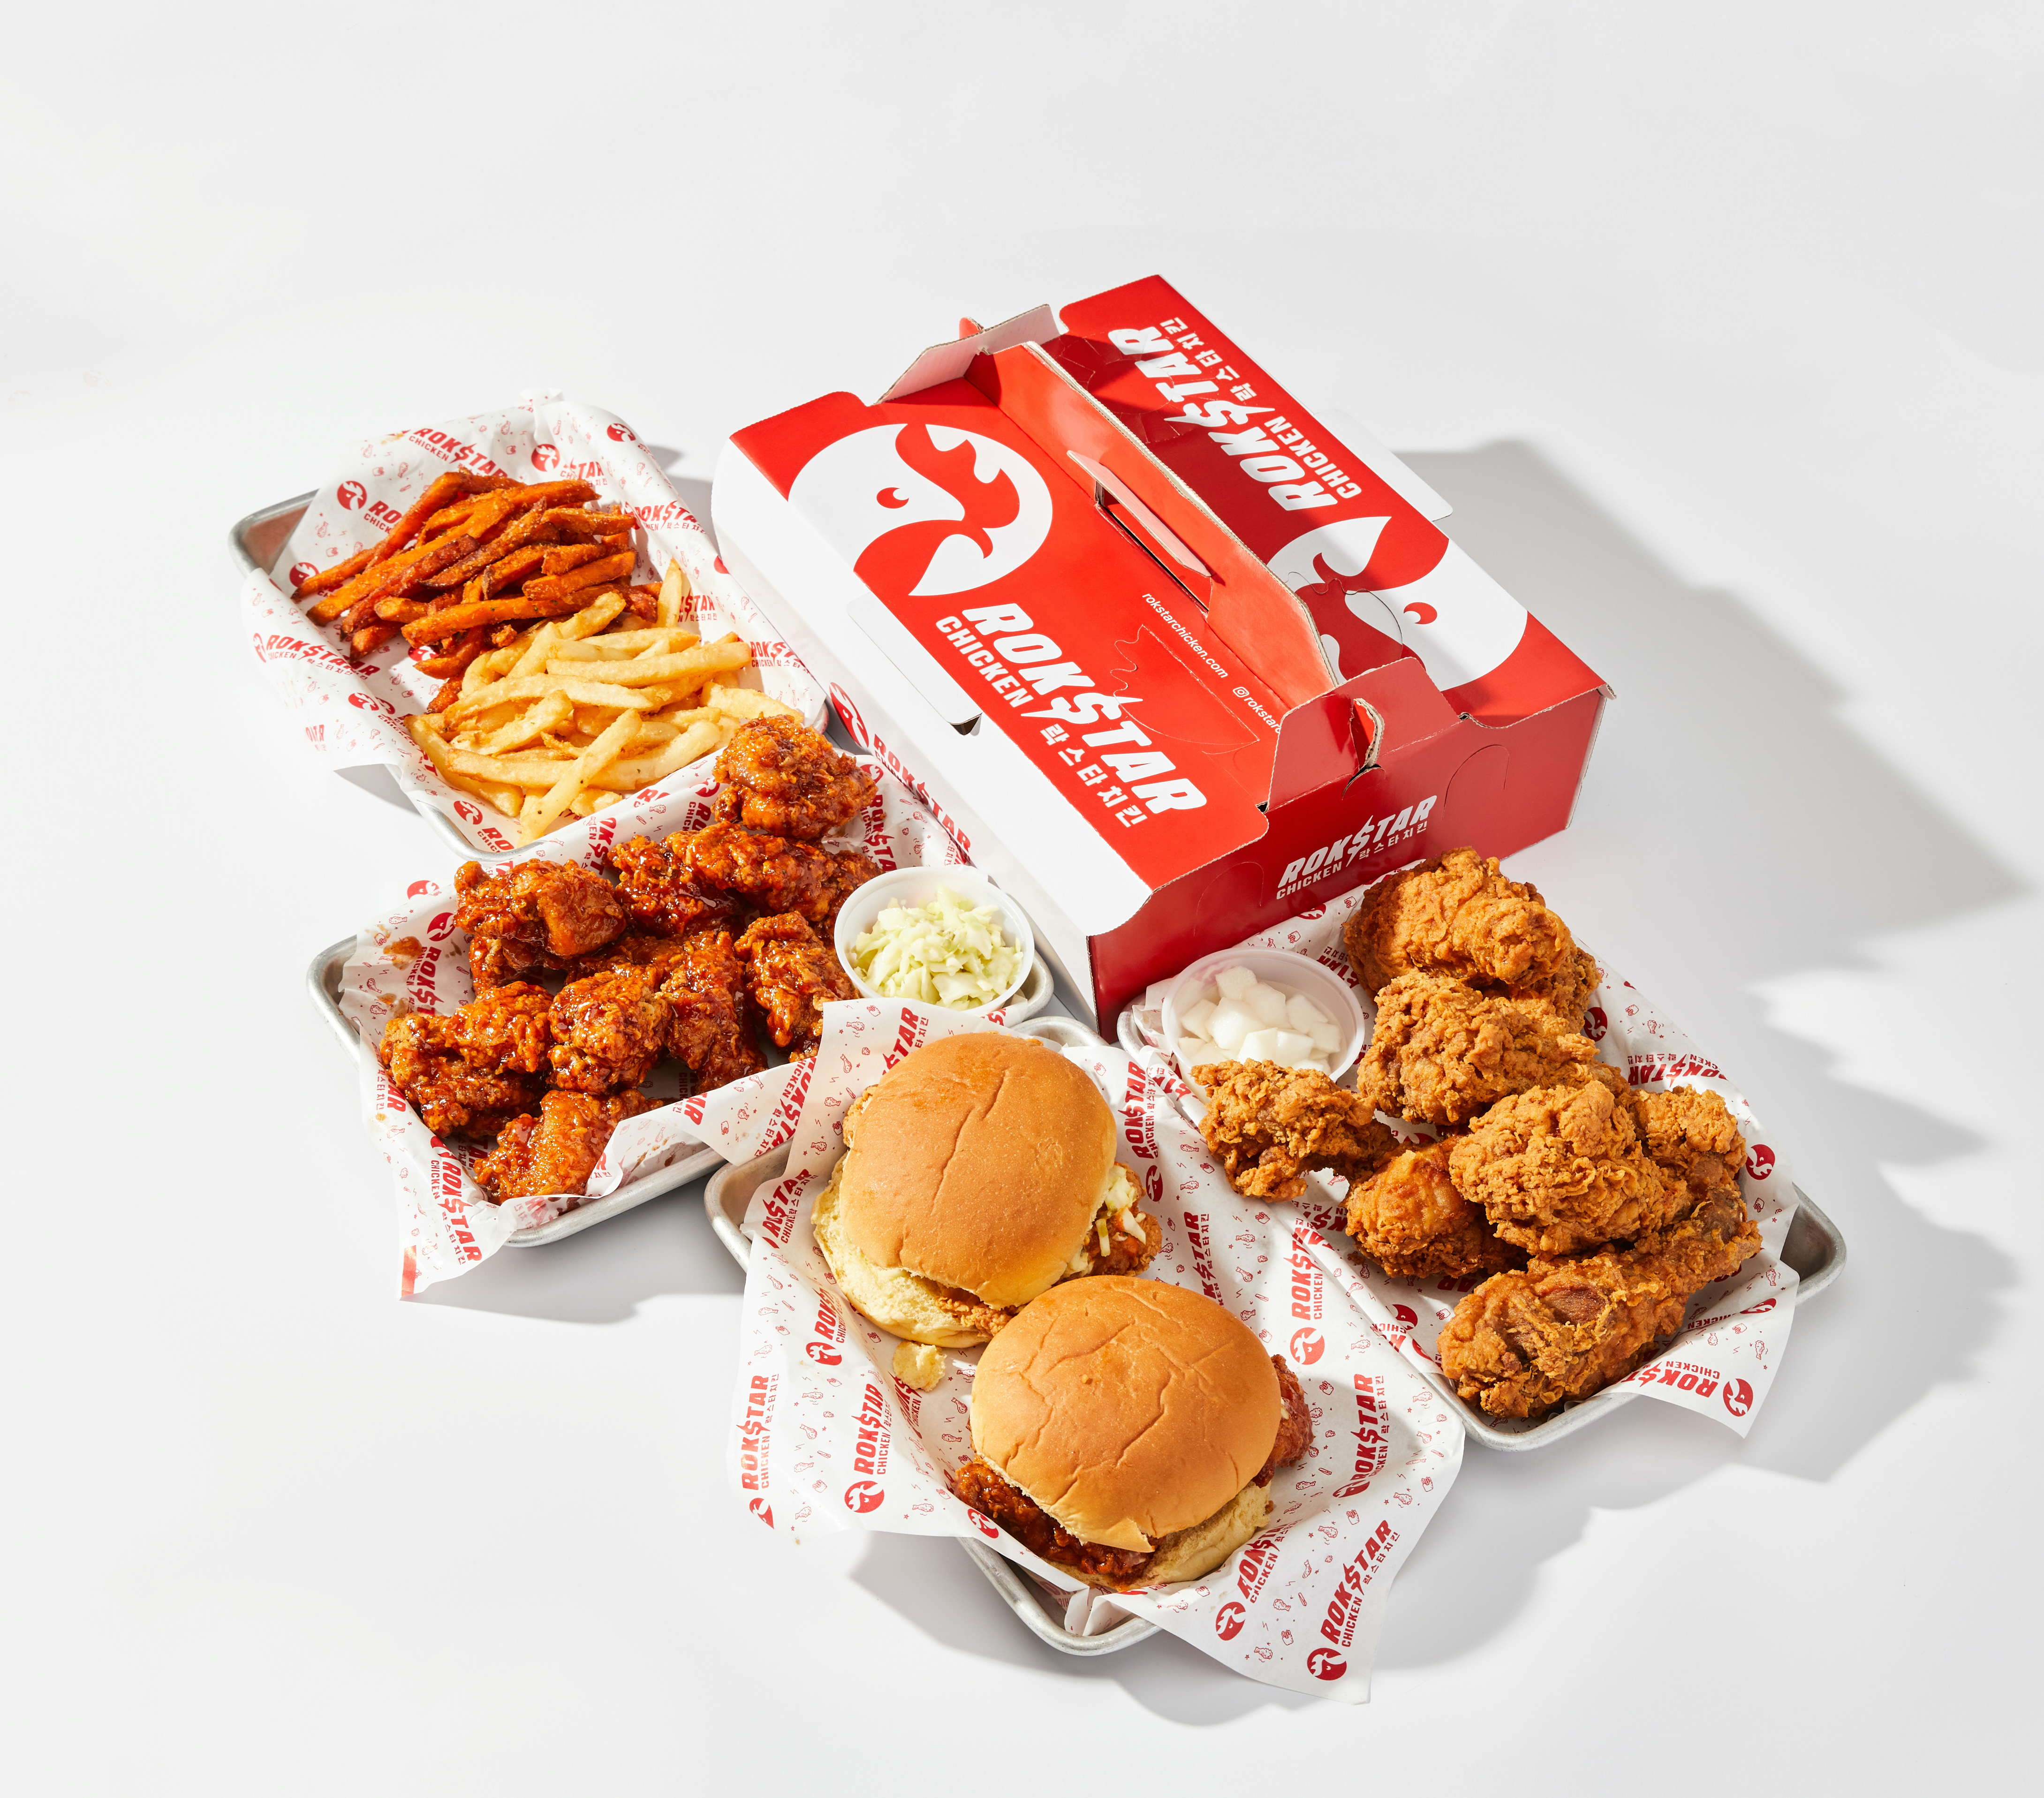 A red and white takeout box and several serving trays filled with fried chicken, two fried chicken sandwiches, and fries.